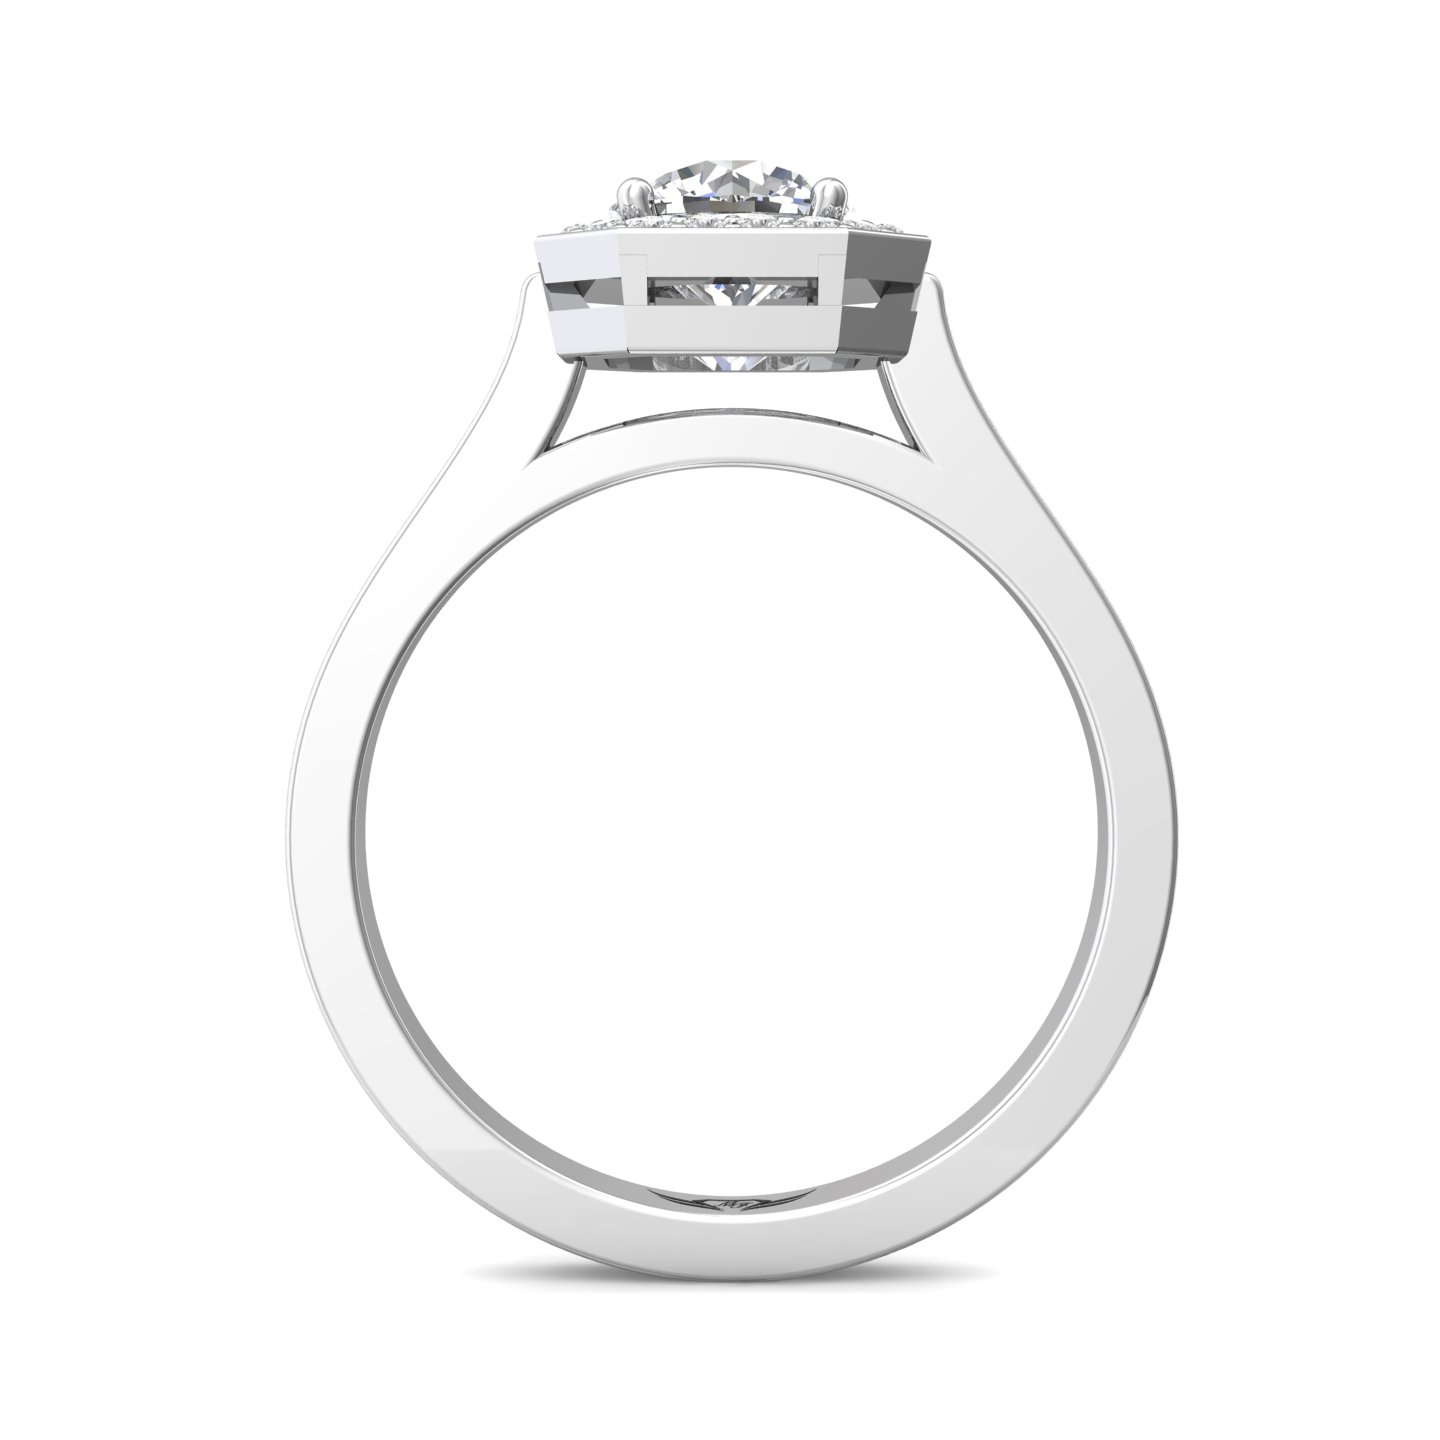 14K White Gold FlyerFit Micropave Halo Engagement Ring Image 2 Christopher's Fine Jewelry Pawleys Island, SC